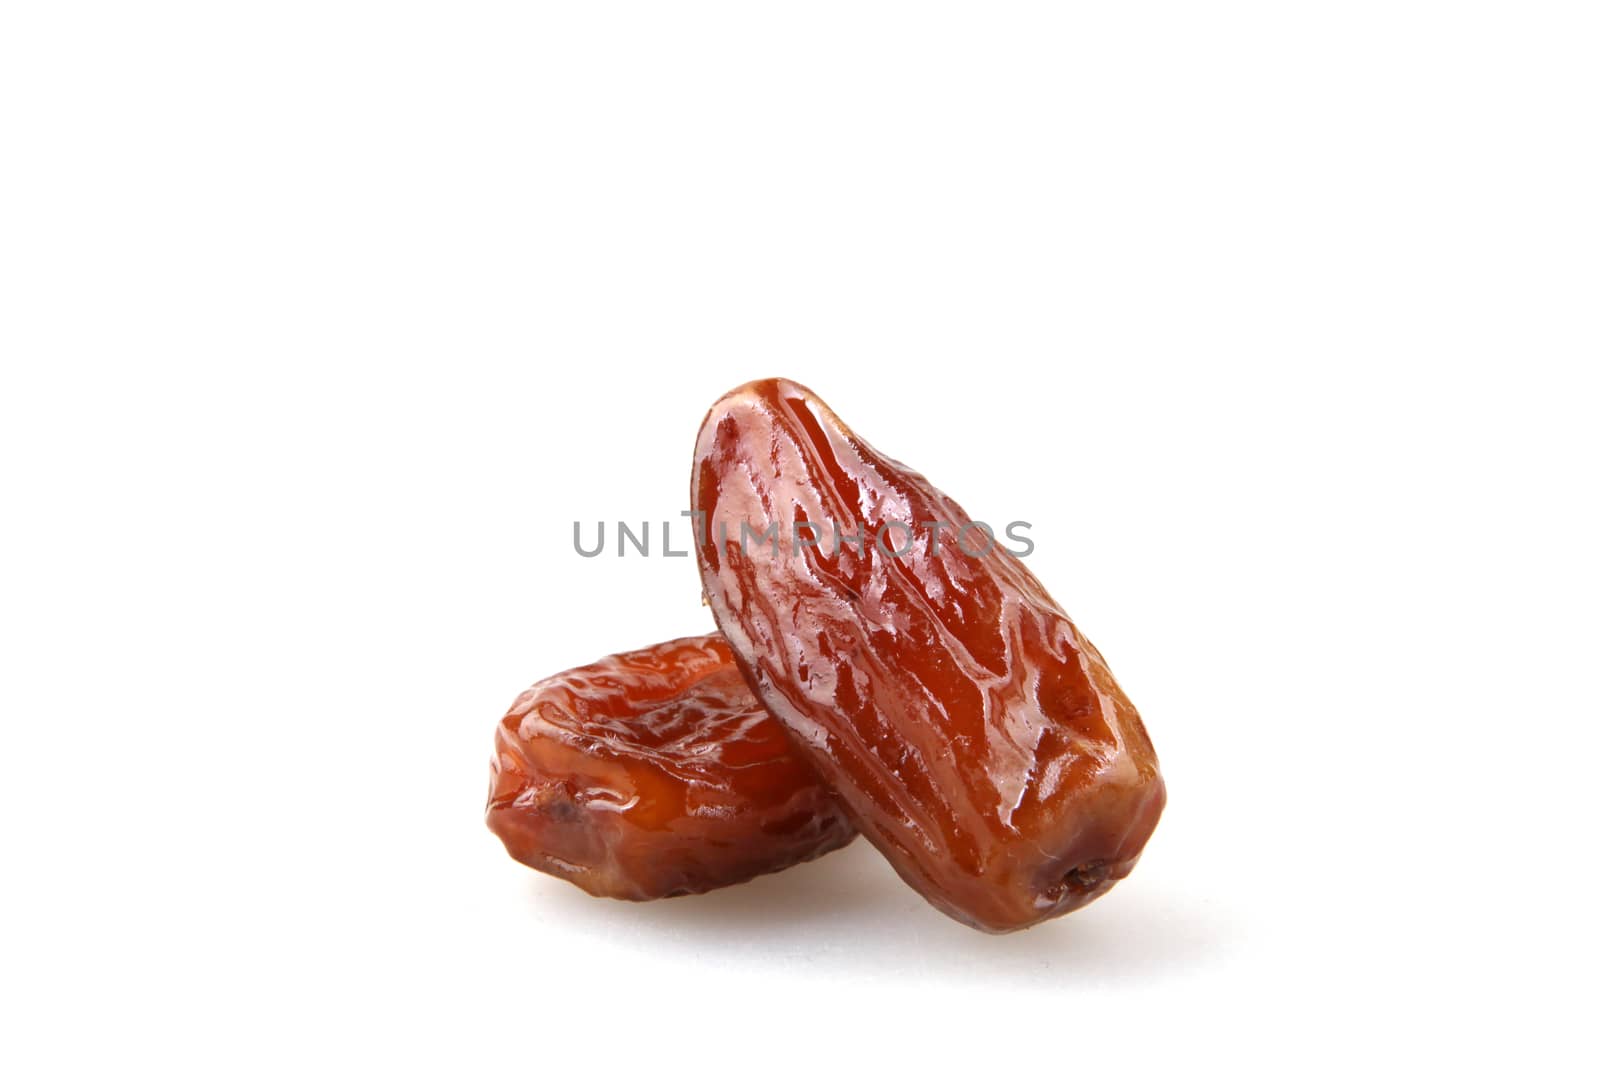 Date Fruit On A White Background